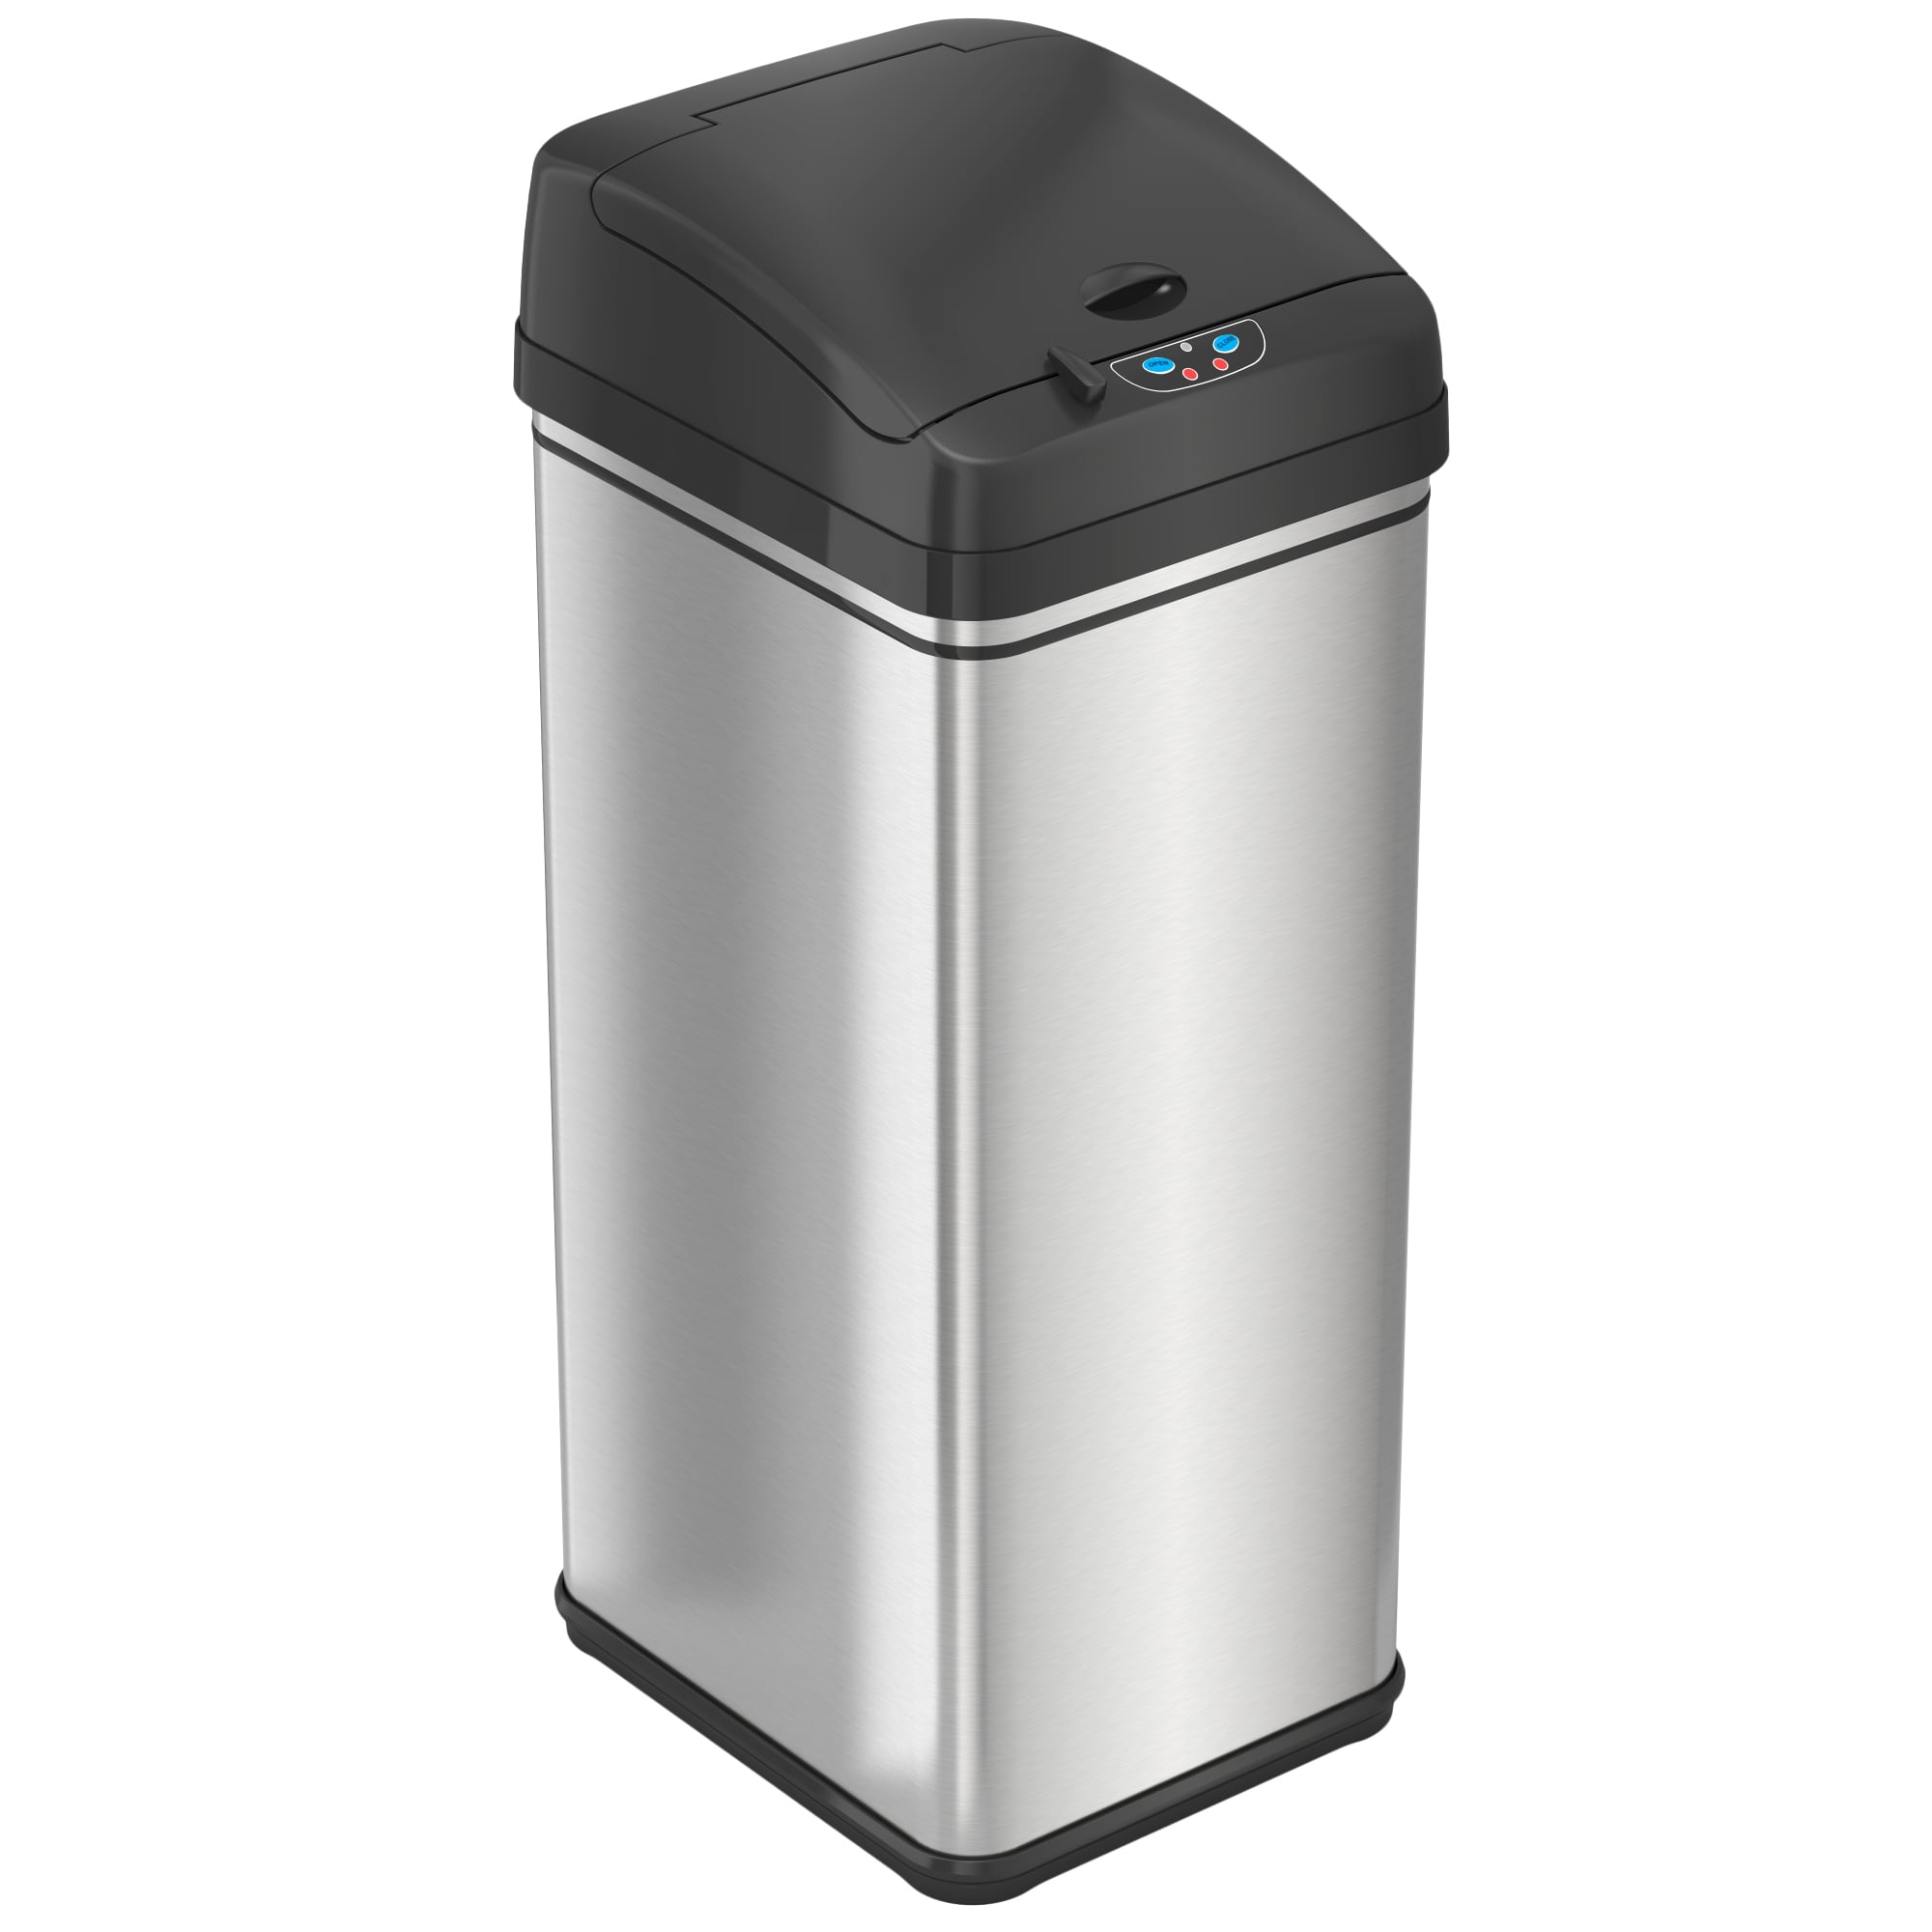 CozyBlock 13 Gallon Automatic Round Trash Can for Kitchen